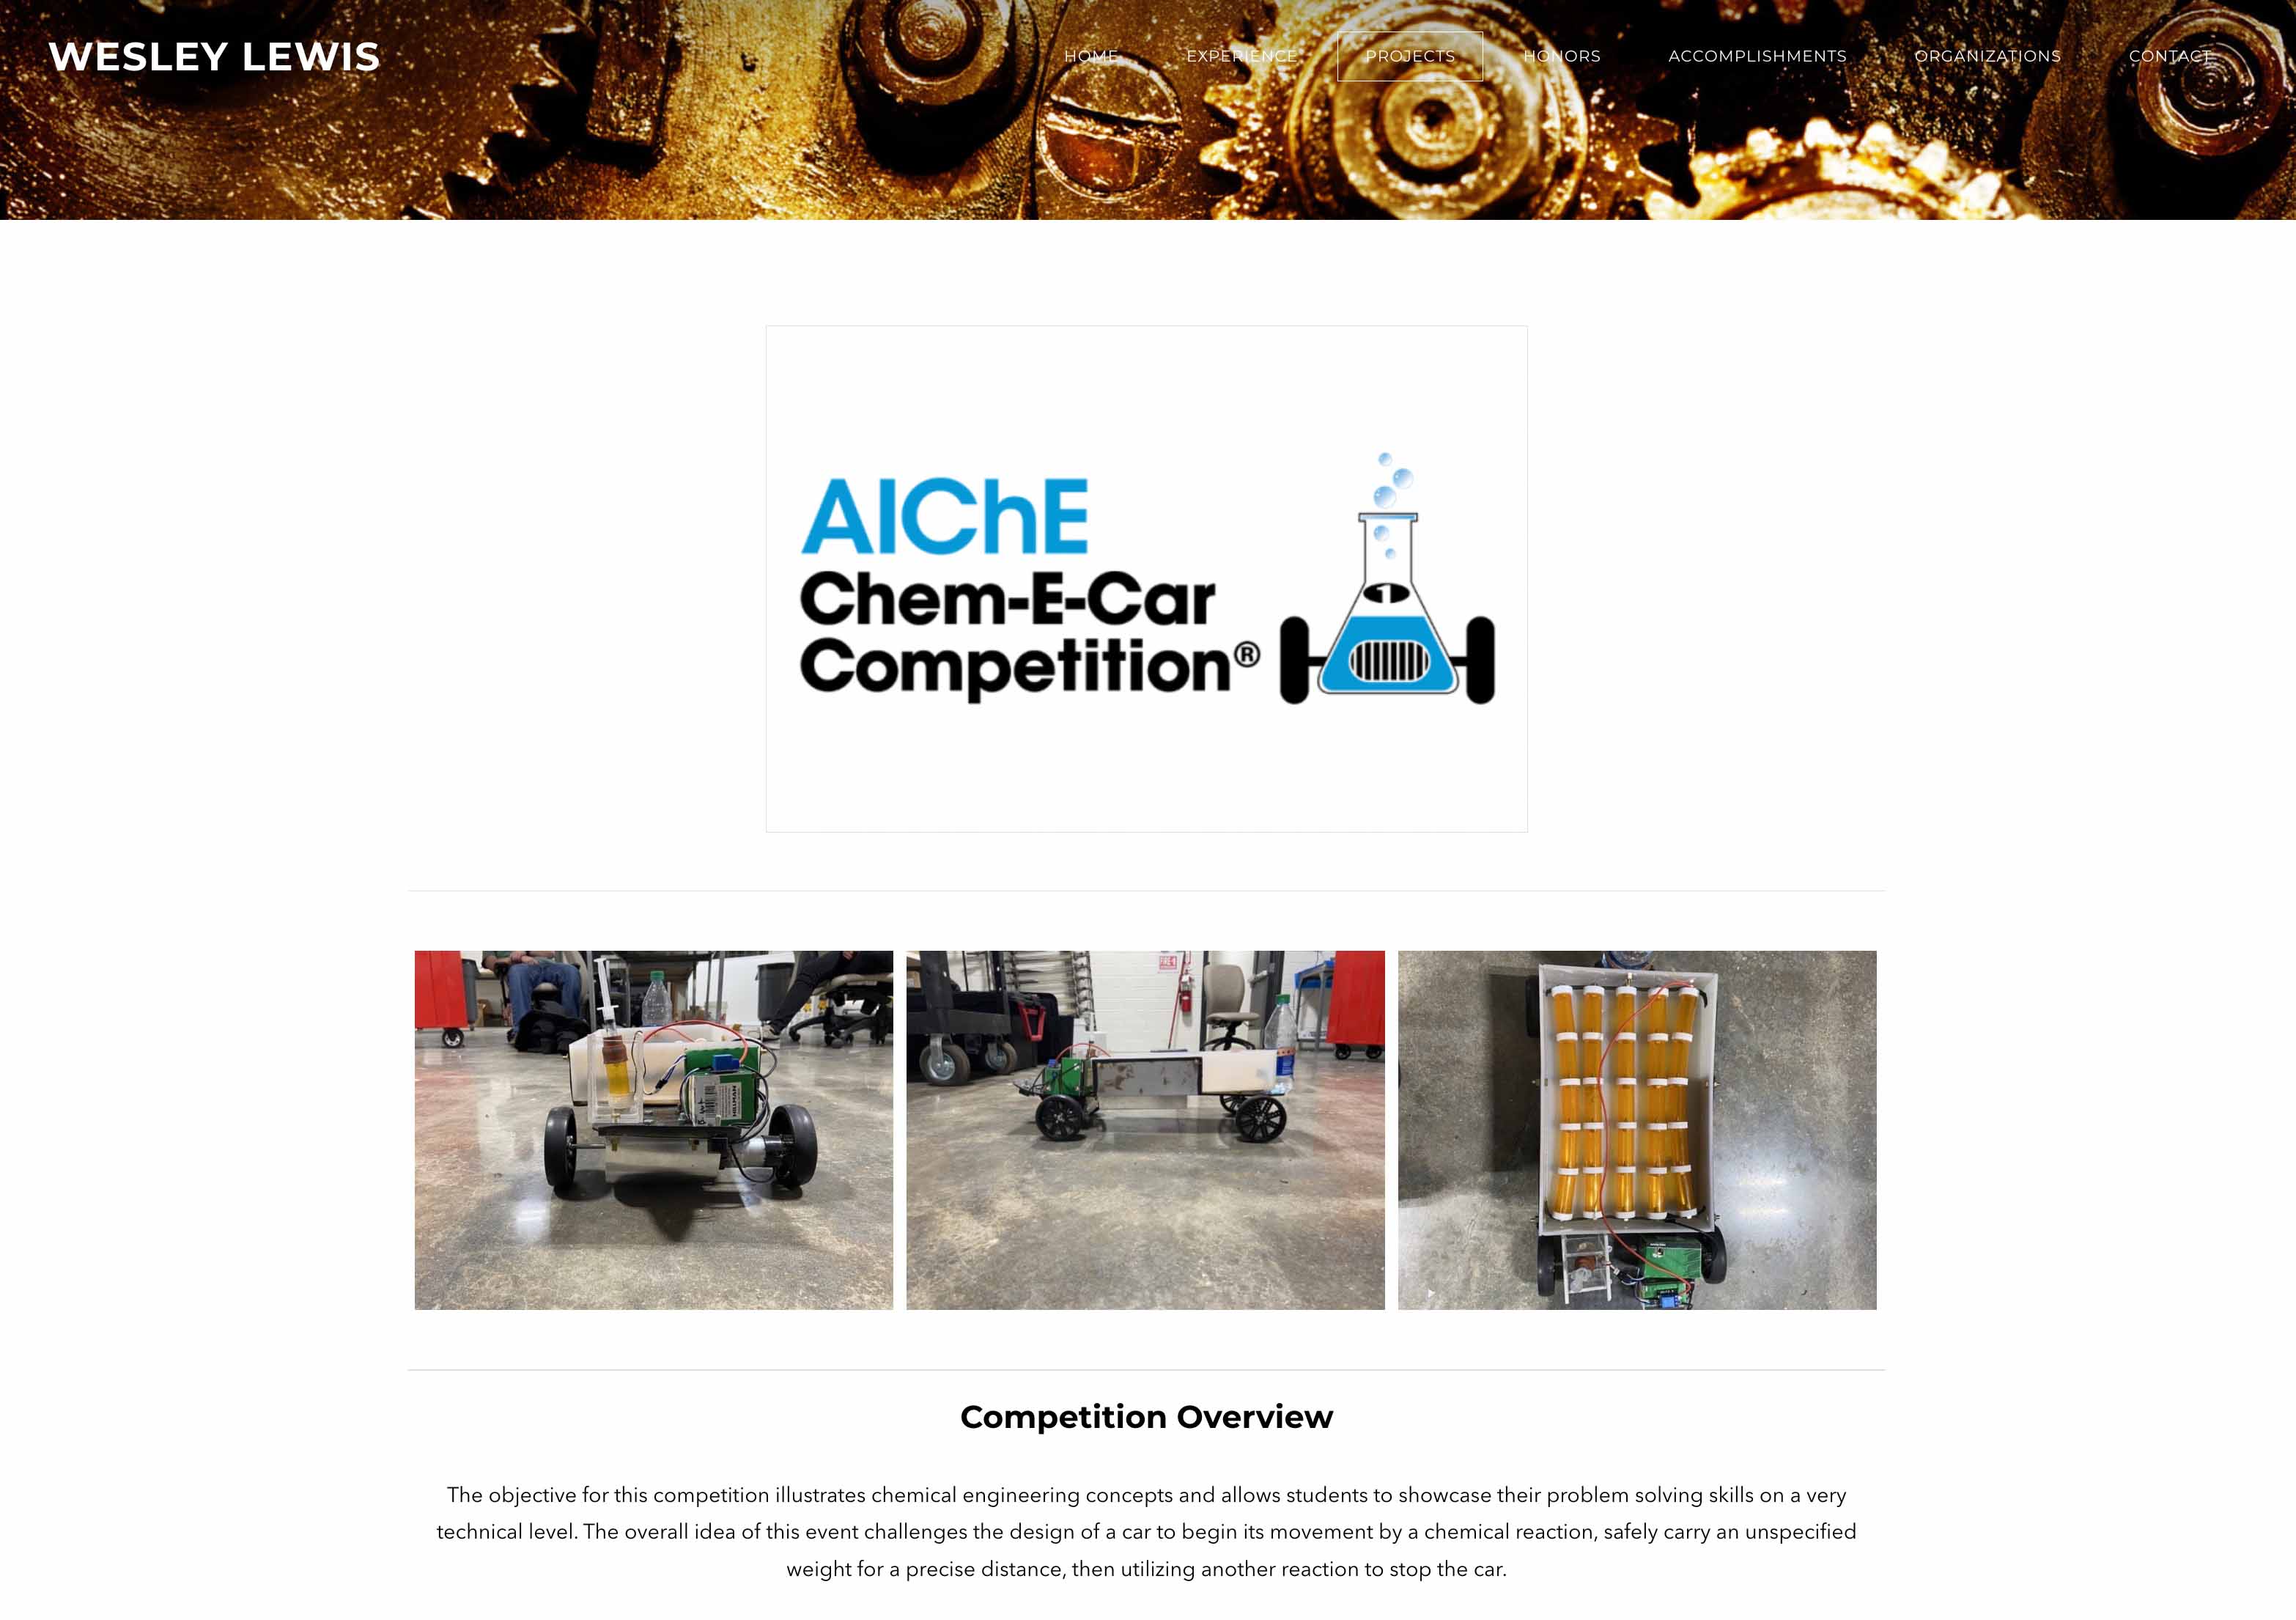 Wesley Lewis’s ePortfolio “Projects” preview page, showing photos from the AIChE Chem-E-Car Competition and a written overview sharing the objective and overall idea of the event. 